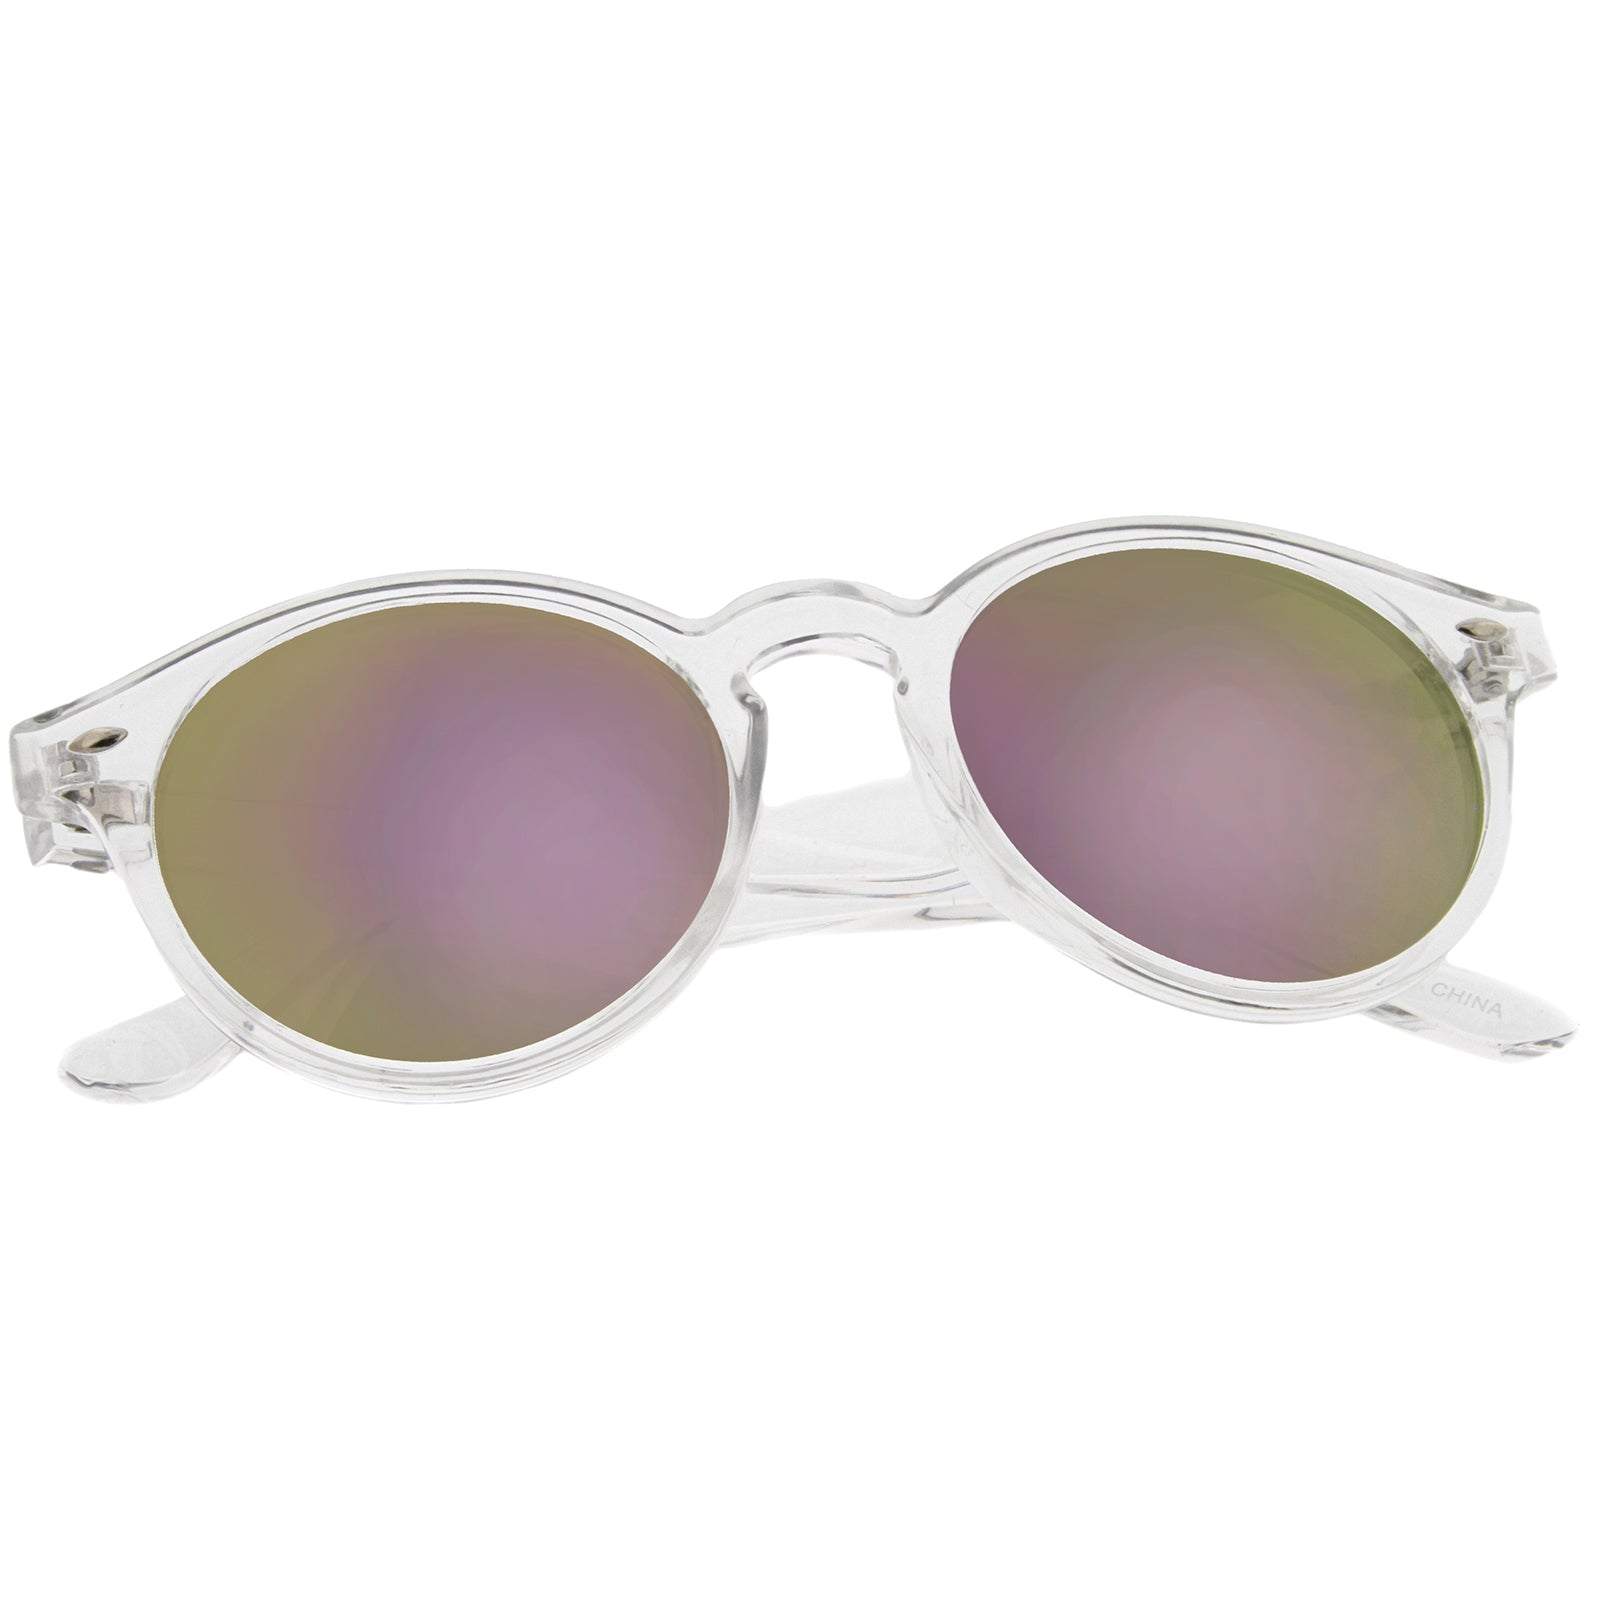 Clear Frame Sunglasses Look Good On Everyone–Get A Pair For Summer Now! -  SHEfinds